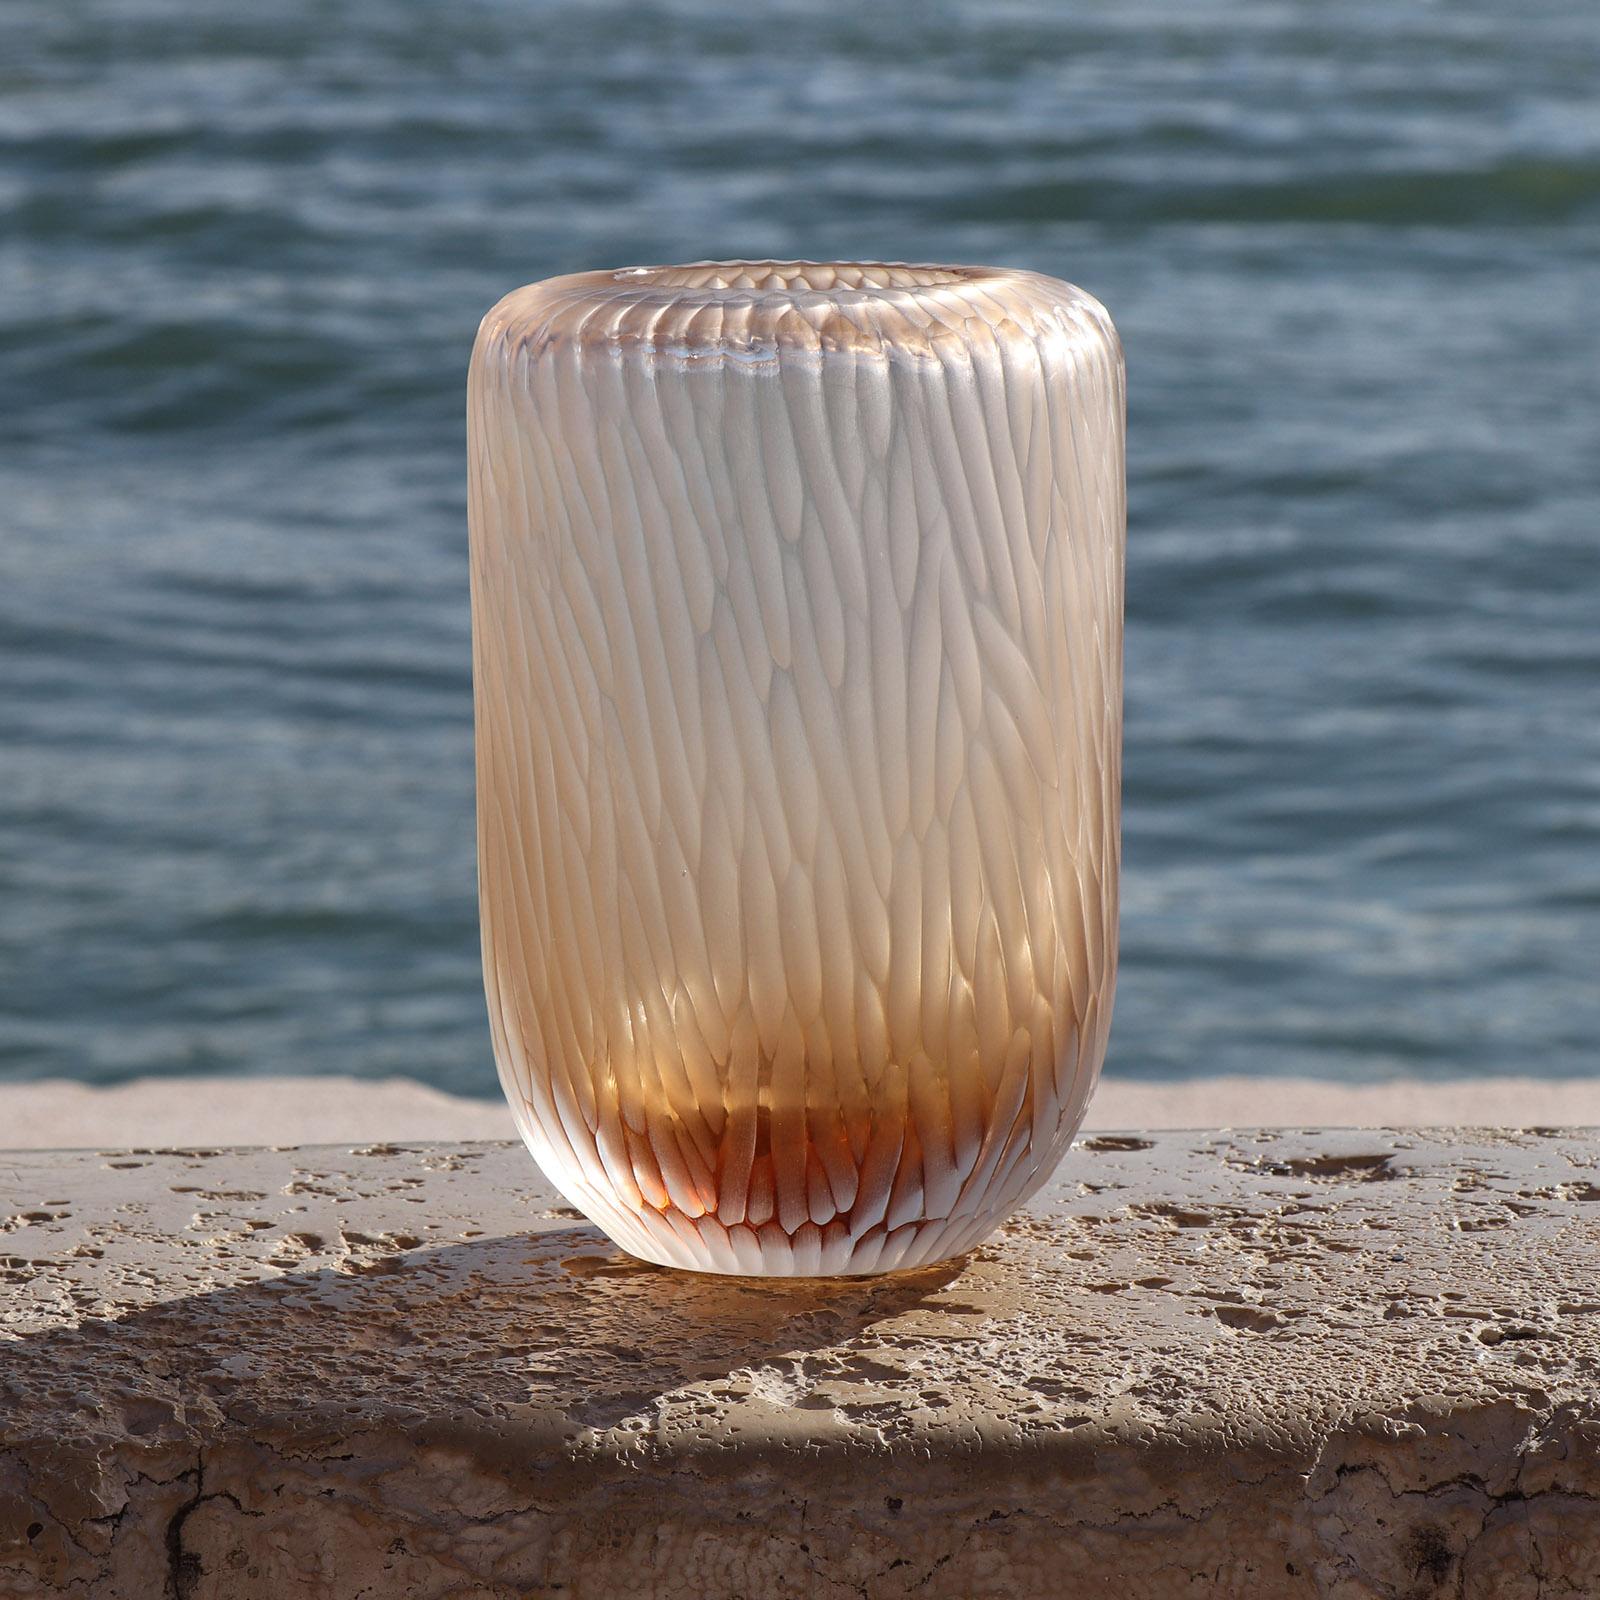 The name Rullo evokes the act of rolling the heated glass on the blow pipe. This small vase is first shaped by blowing the molten glass and further modelled by carving the surface once cooled. The vibrations of the light on the etched surface are